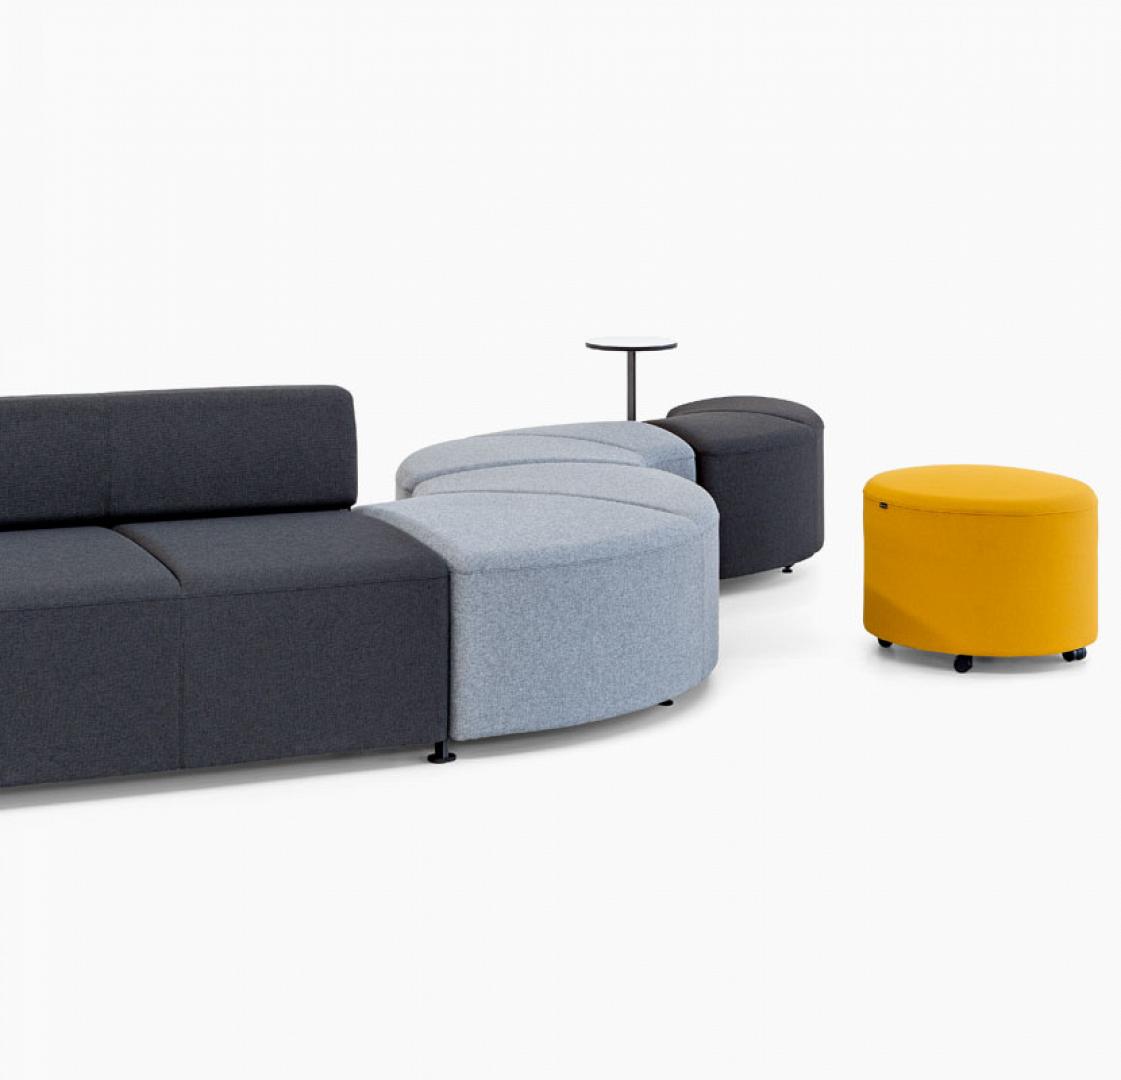 Bend soft seating